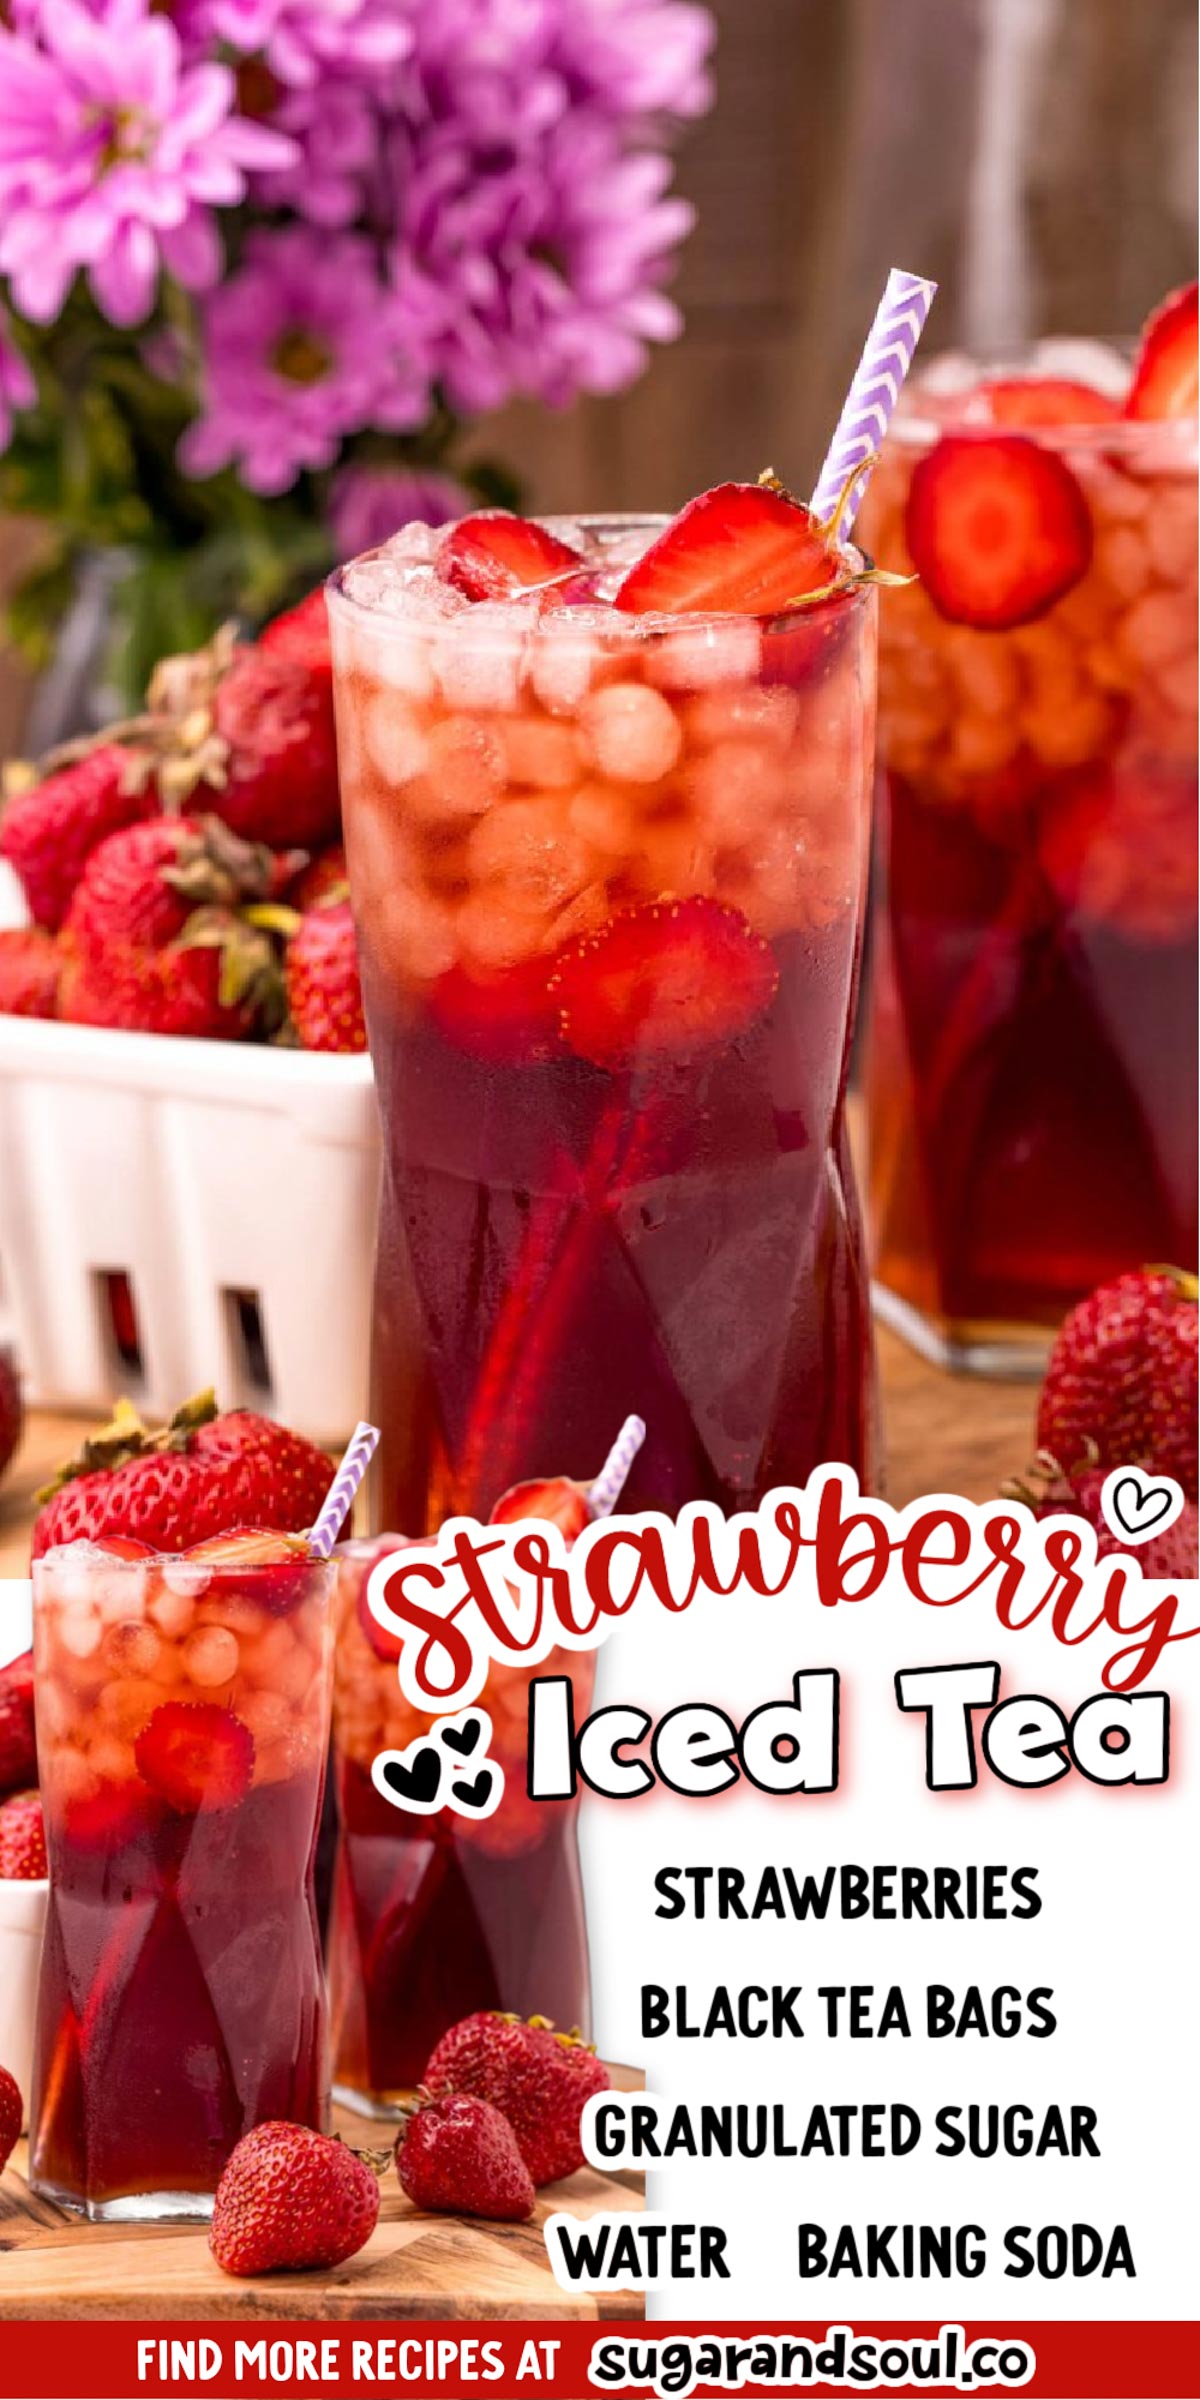 This Iced Strawberry Tea uses a 3-ingredient homemade strawberry simple syrup to sweeten up freshly steeped tea in just 35 minutes! This fruity sweet tea is perfect for cooling down with on those hot summer days!
 via @sugarandsoulco